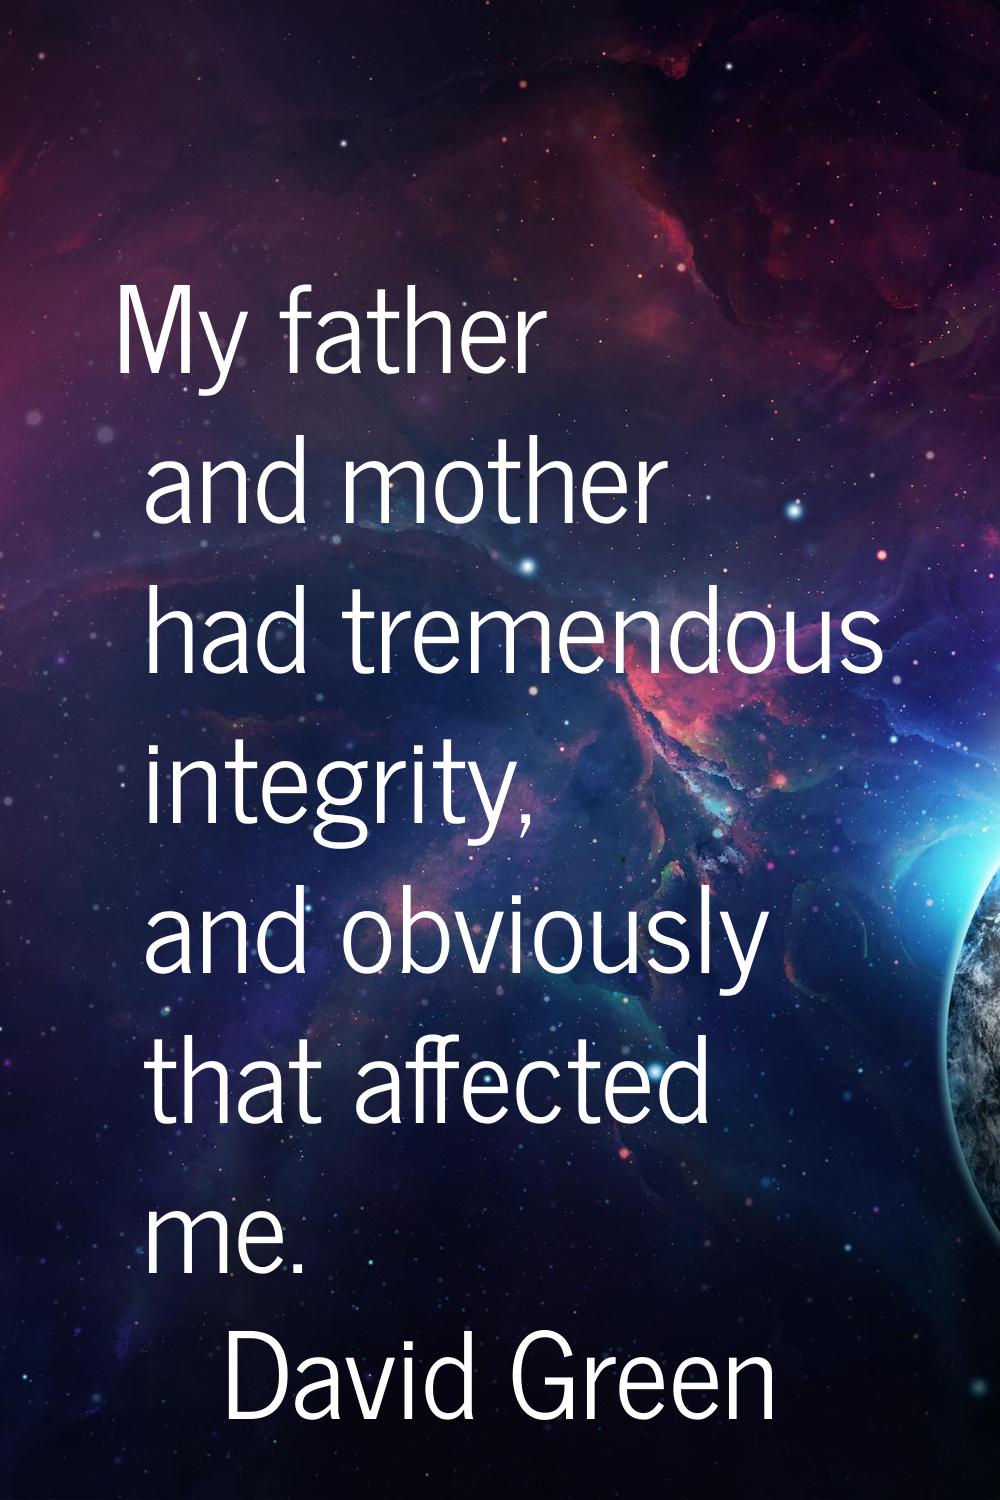 My father and mother had tremendous integrity, and obviously that affected me.